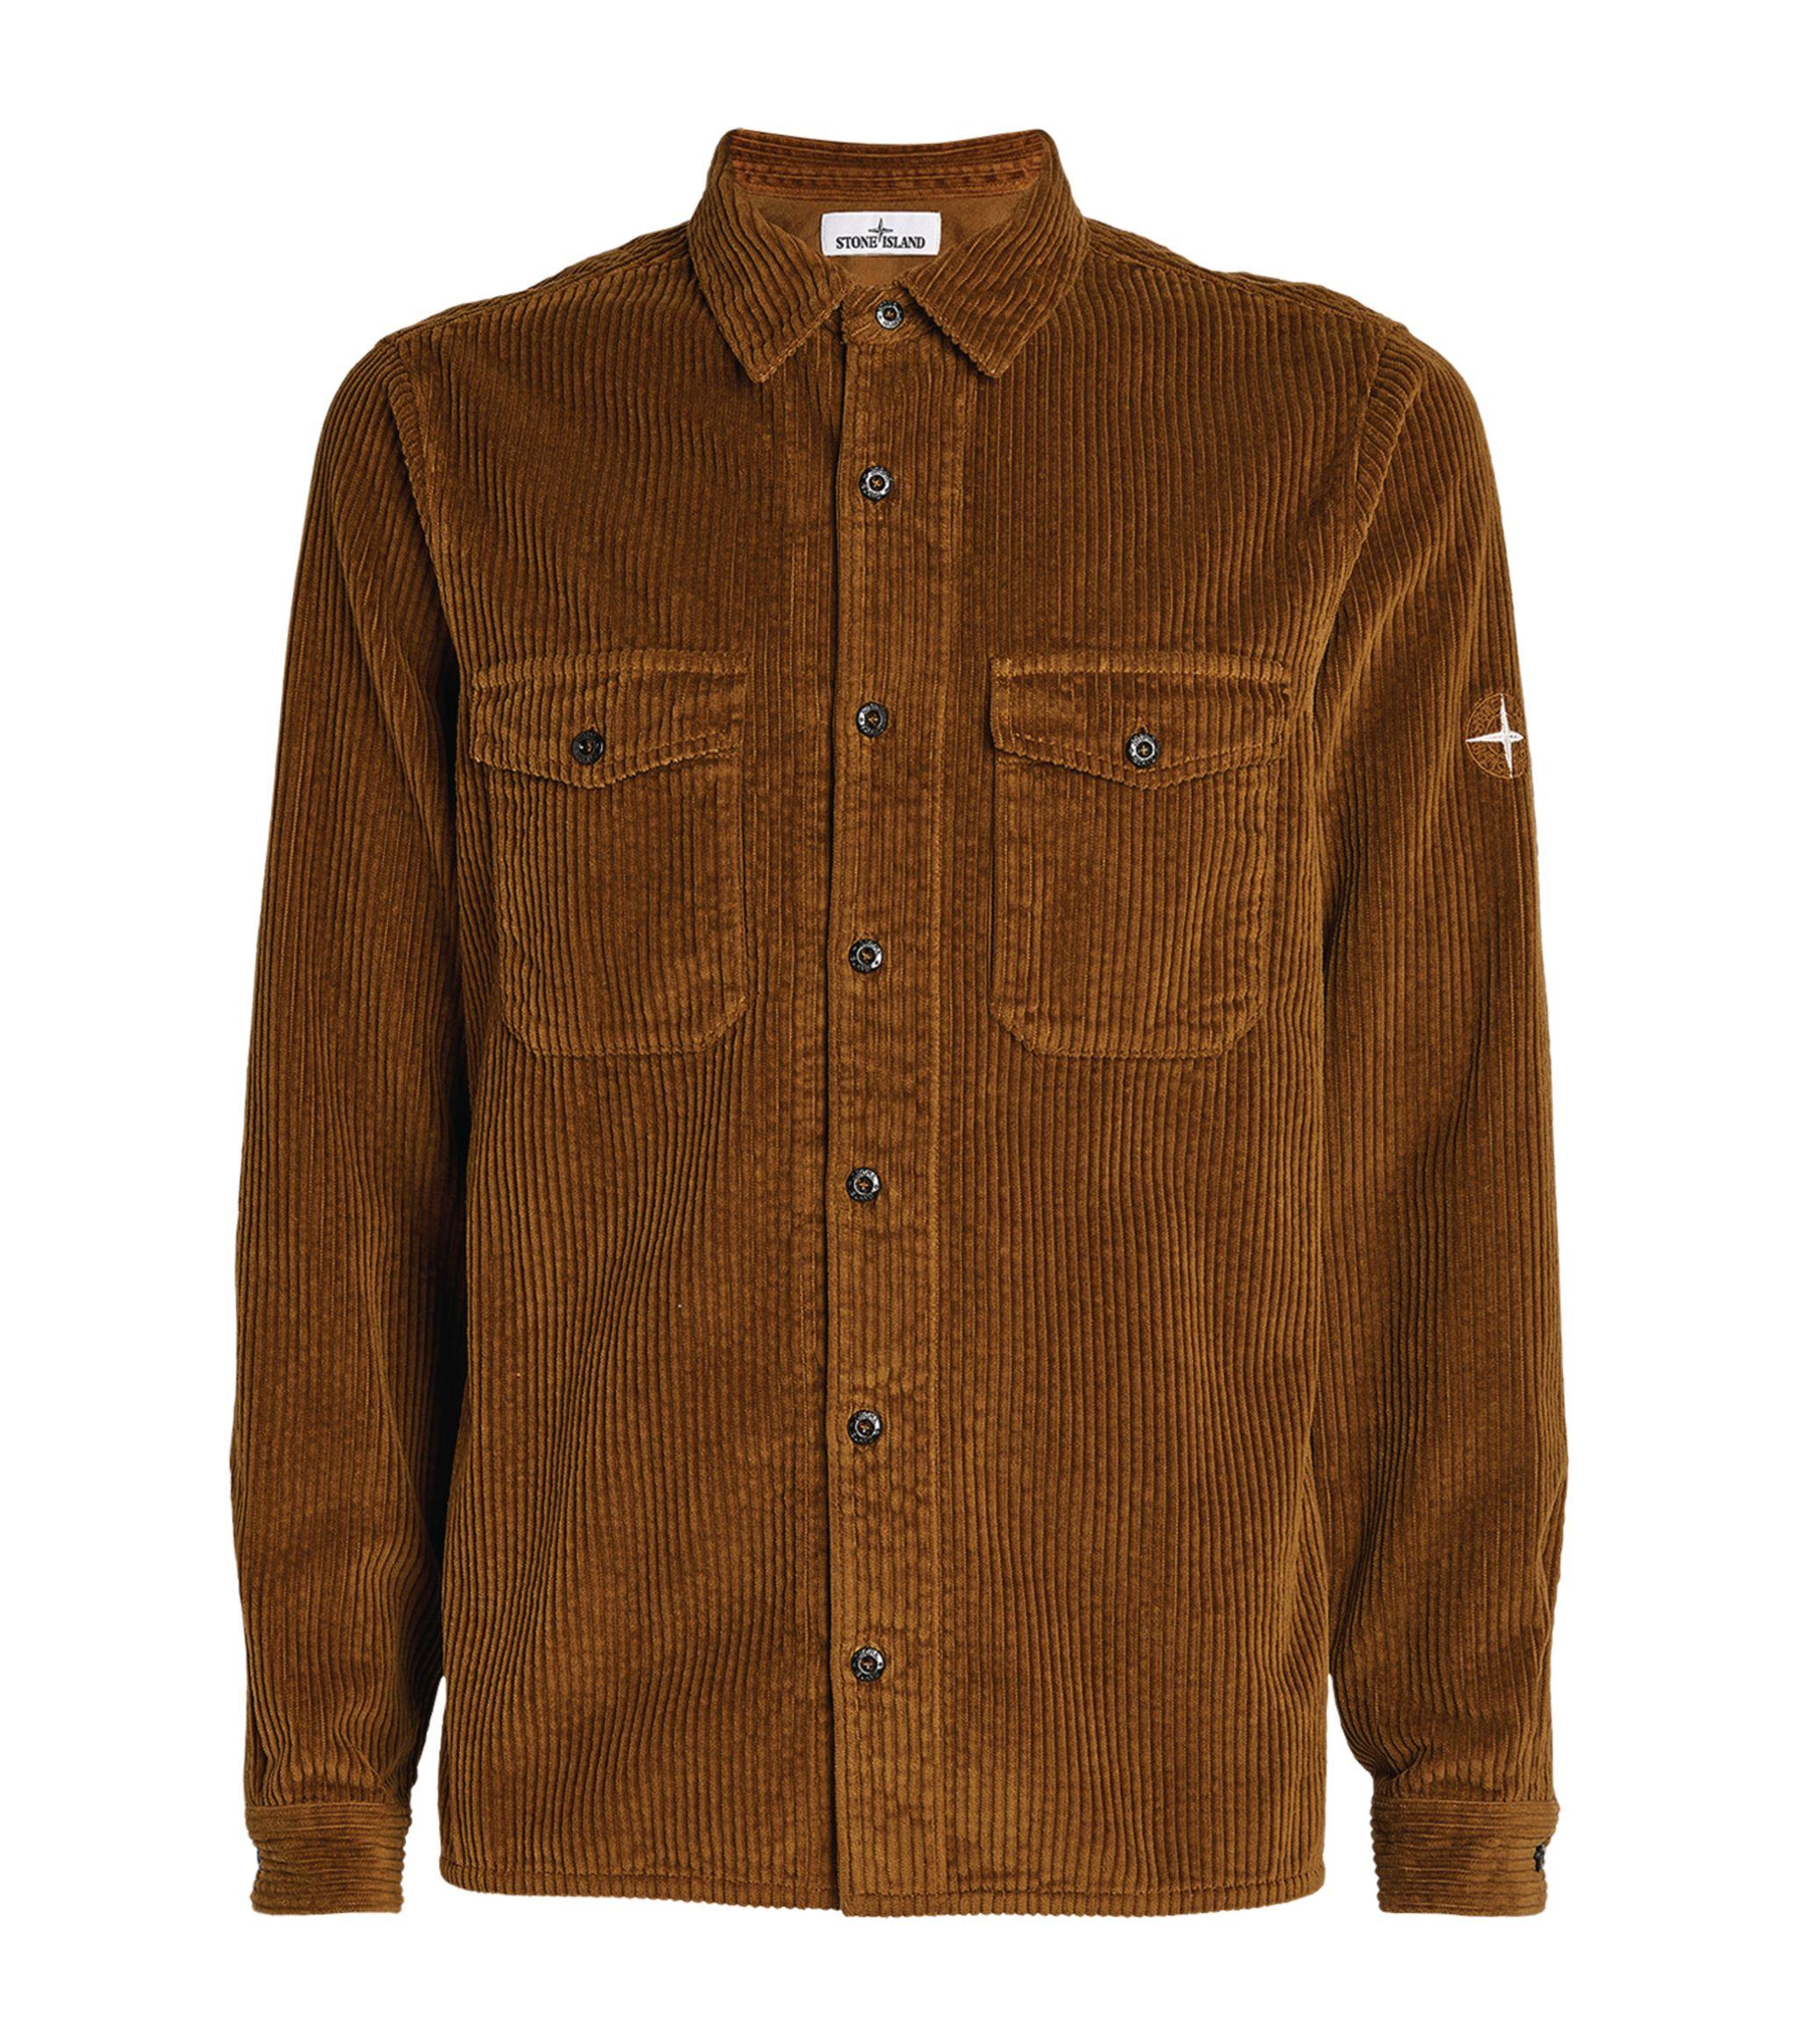 Stone Island Embroidered Compass Logo Corduroy Overshirt in Tobacco (Brown)  for Men | Lyst